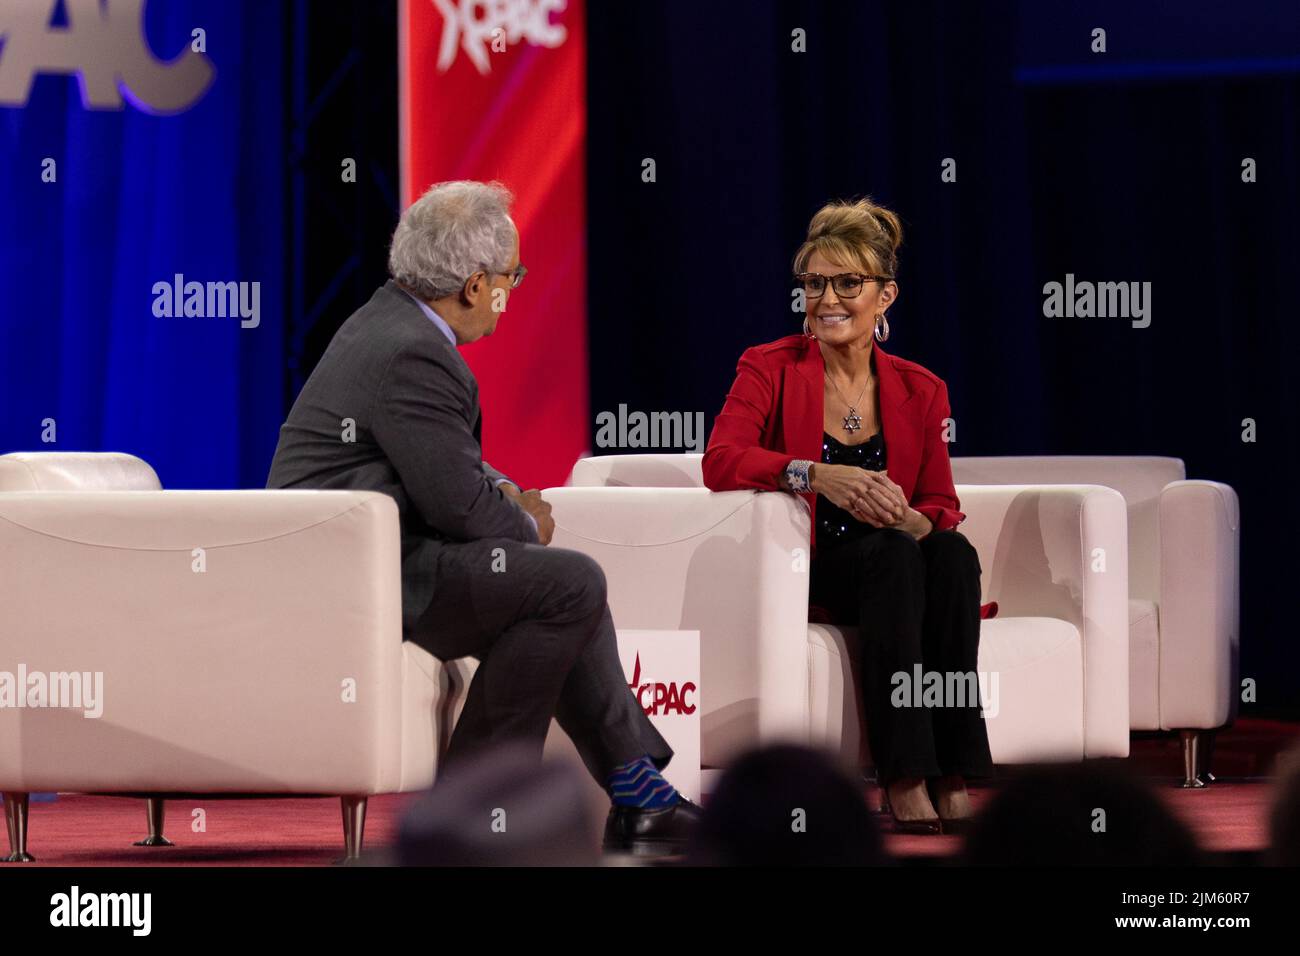 Dallas, USA. 04 Aug 2022. Charlie Gerow interviews Sarah Palin at the Conservative Political Action Conference. Credit: Valerio Pucci / Alamy Stock Photo